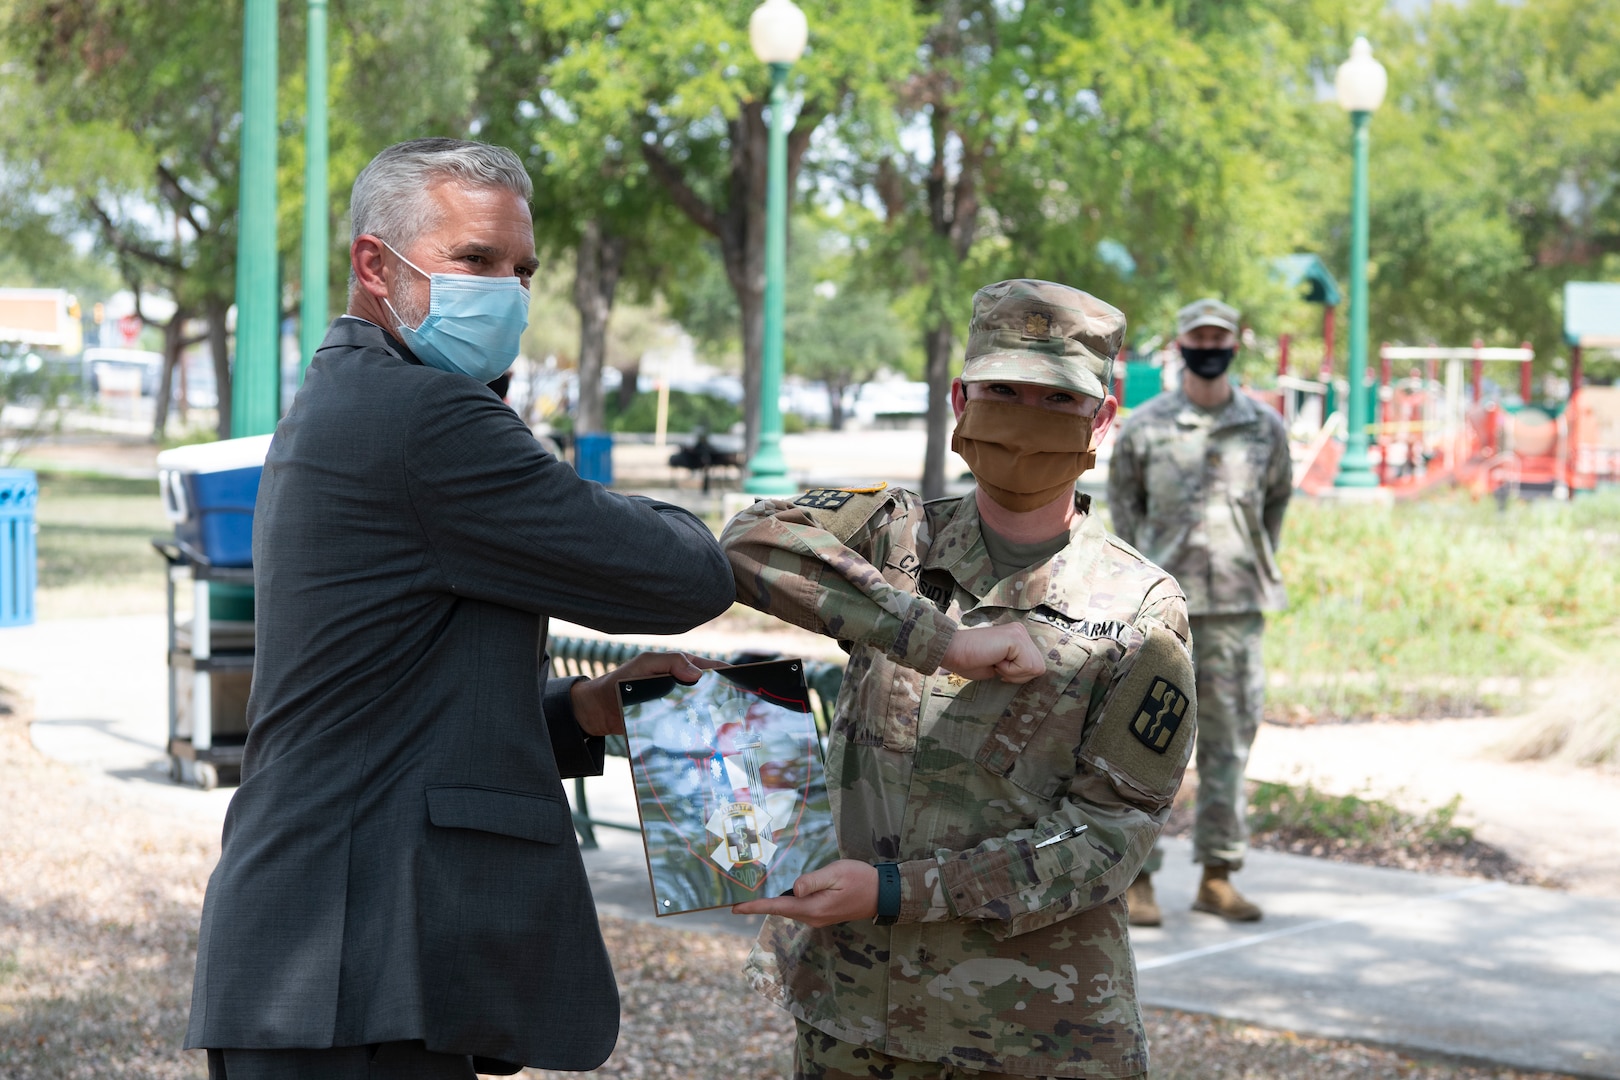 A Soldier presents a plaque to a man in a suit, both wearing masks.